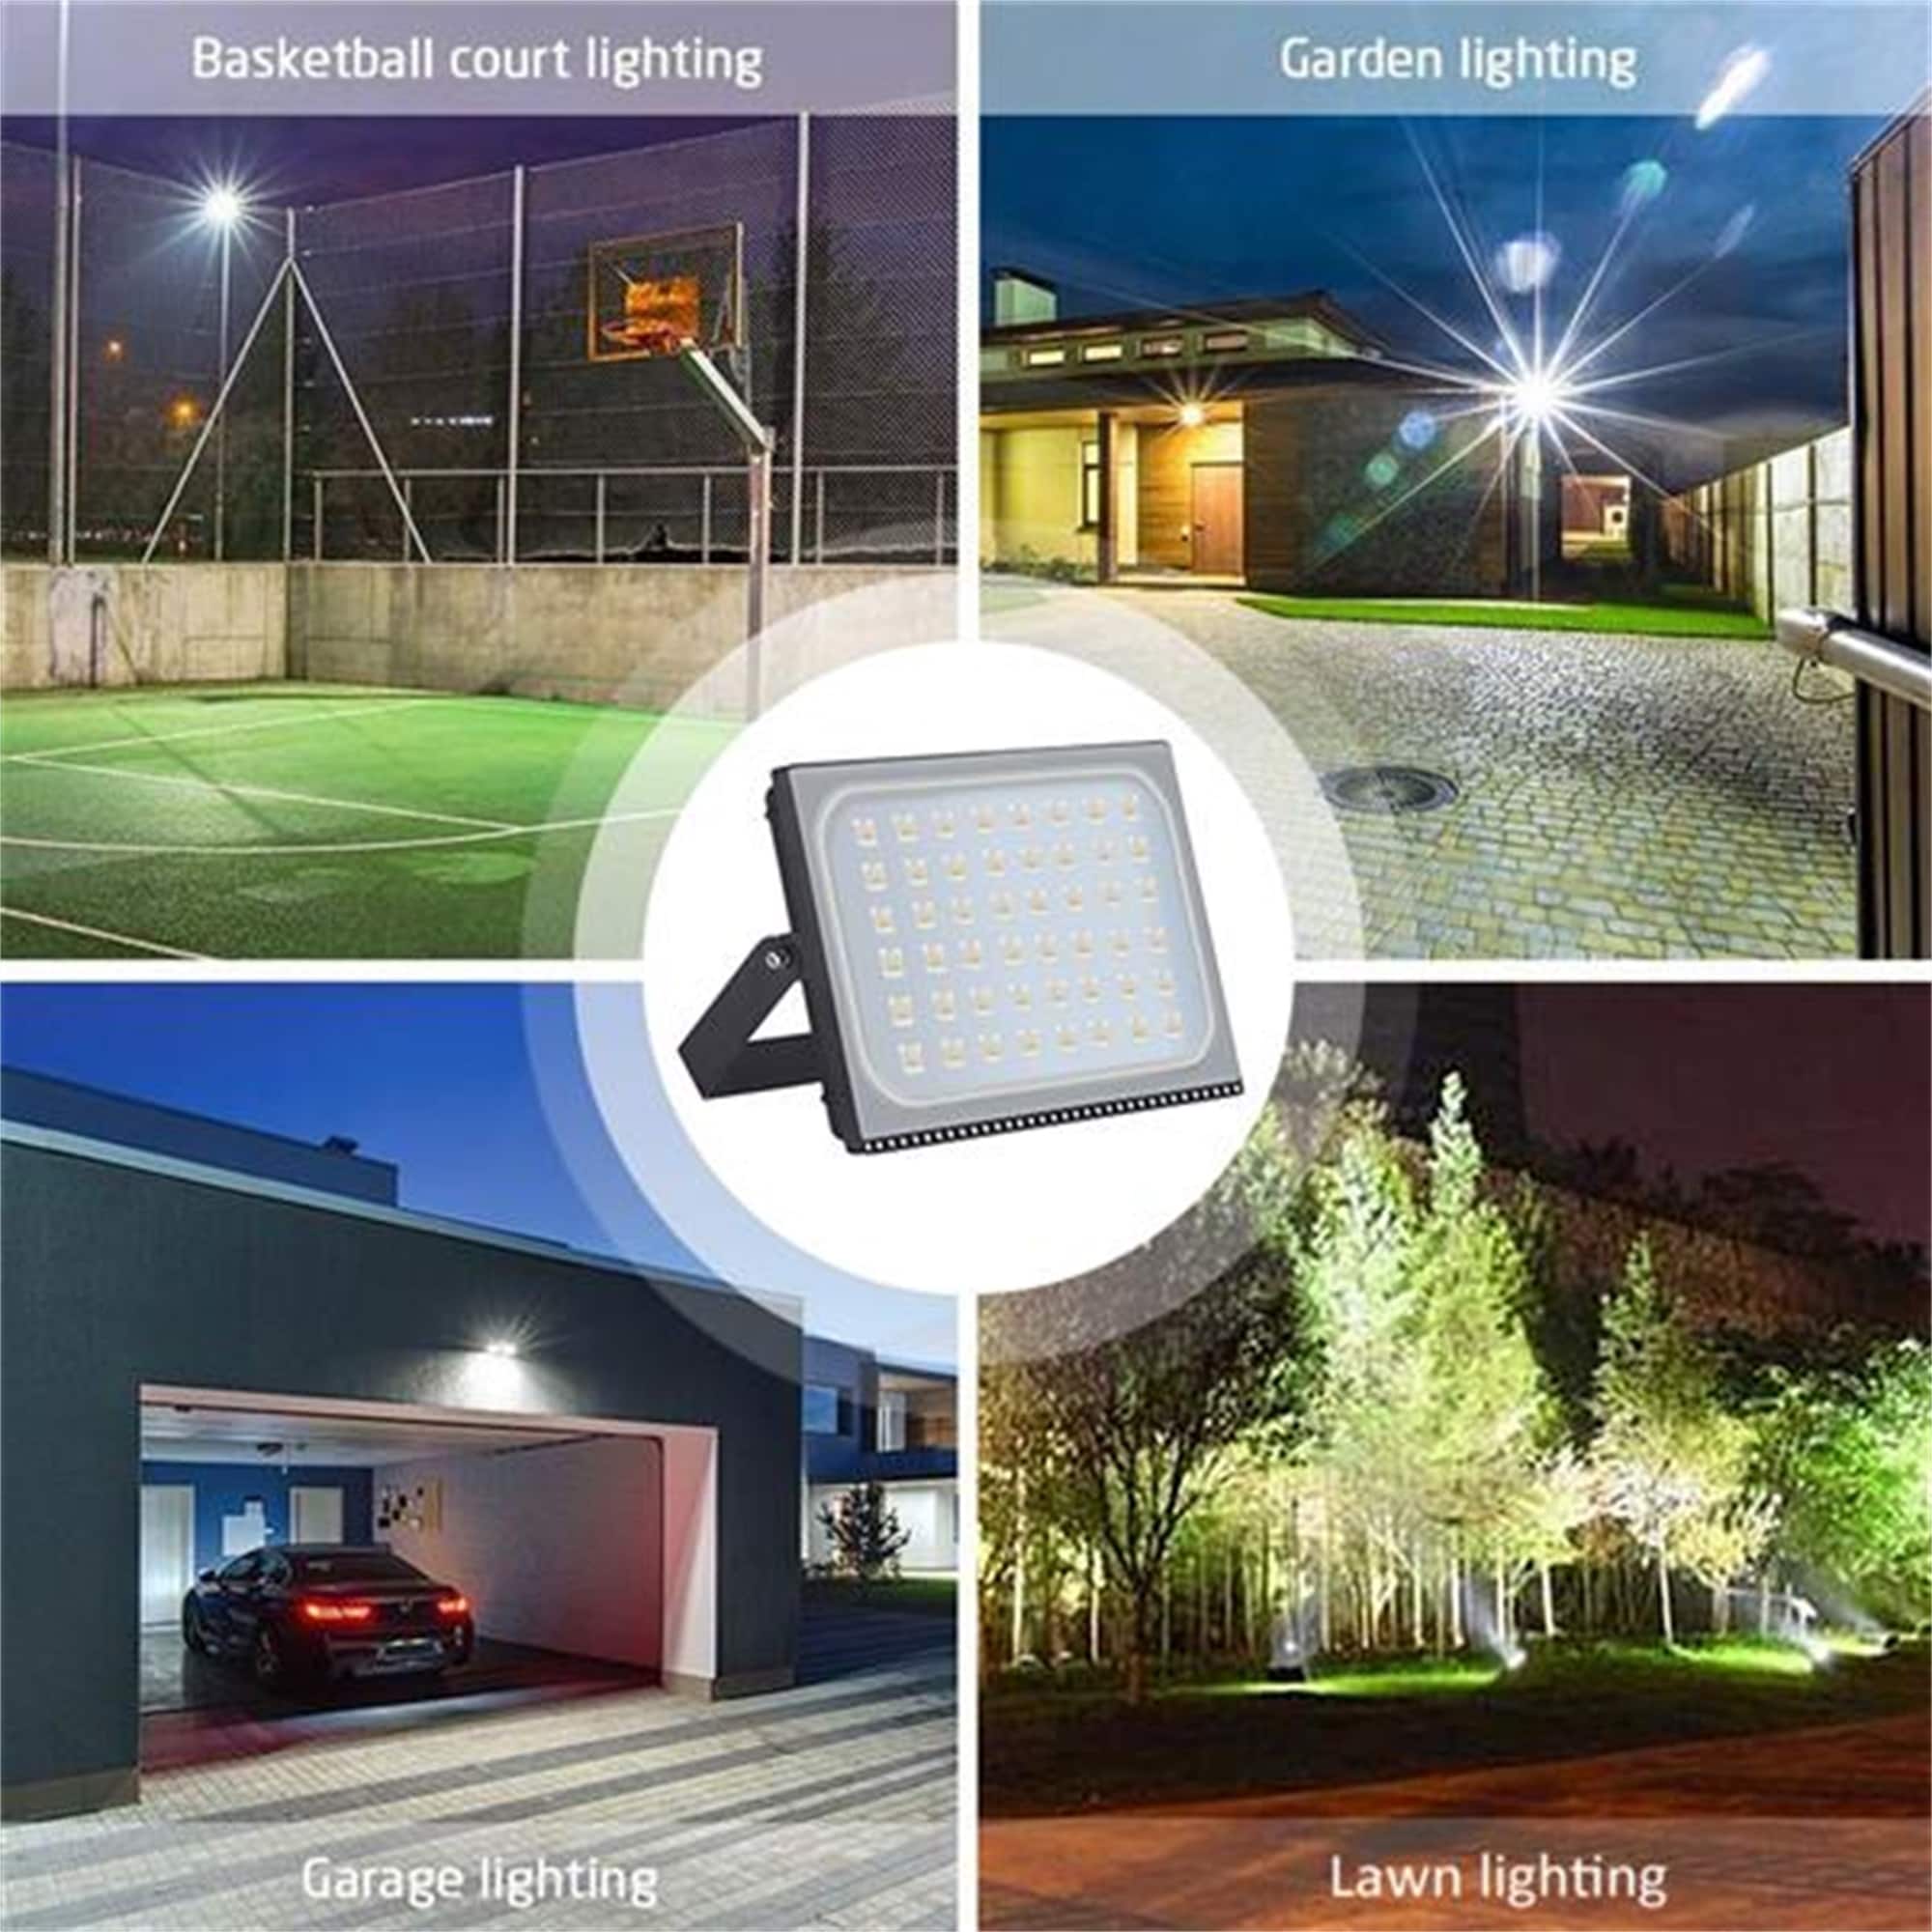 Details about   1x 300W LED Flood Lights Cool White Outdoor Lighting Spotlight Garden Yard Lamps 